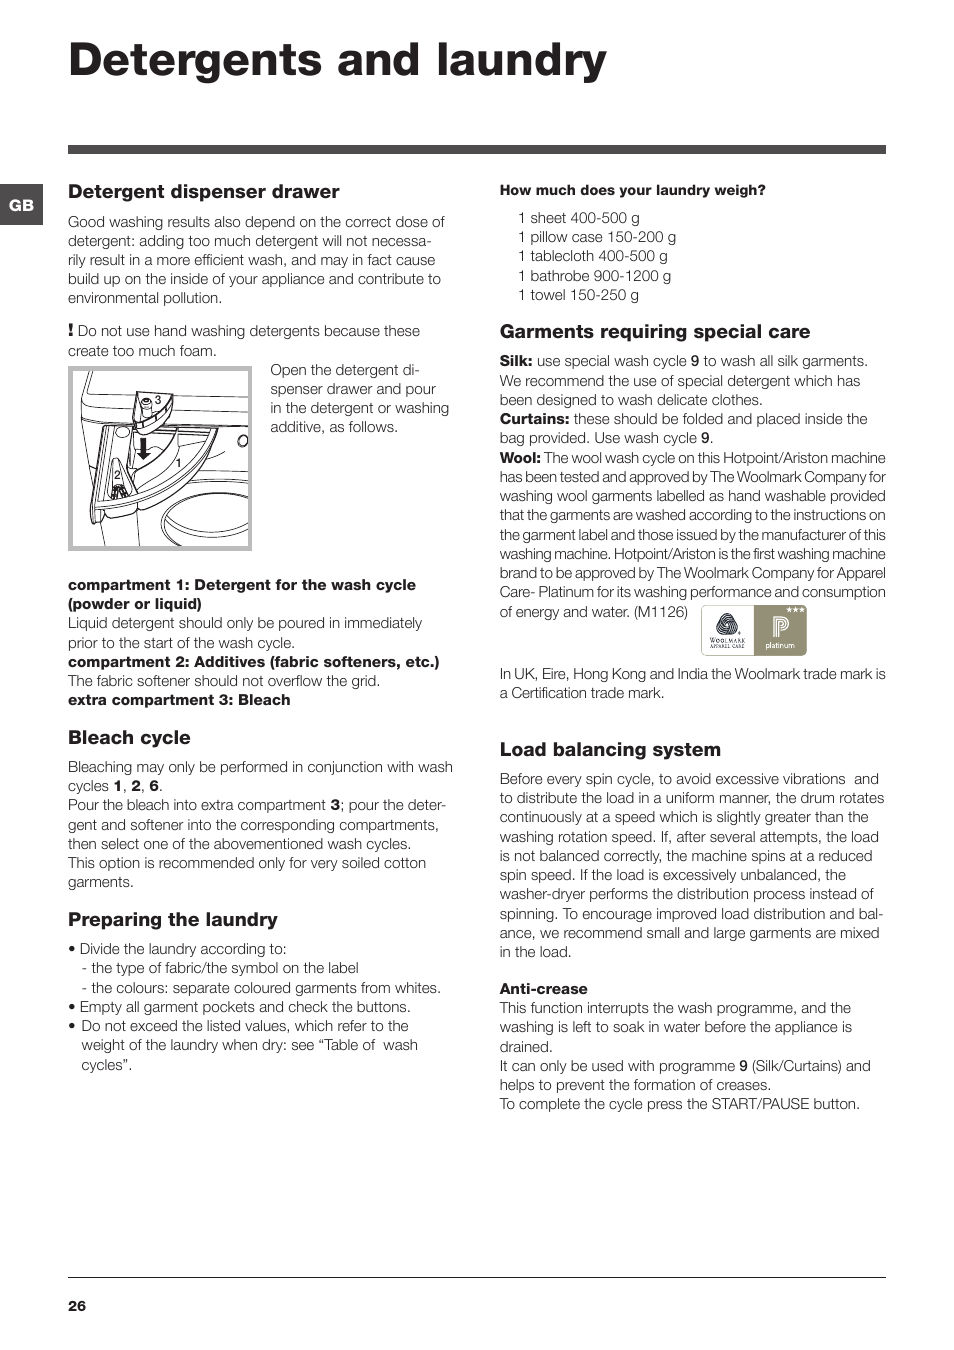 Detergents and laundry | Hotpoint Ariston CAWD 129 EU User Manual | Page 26  / 72 | Original mode